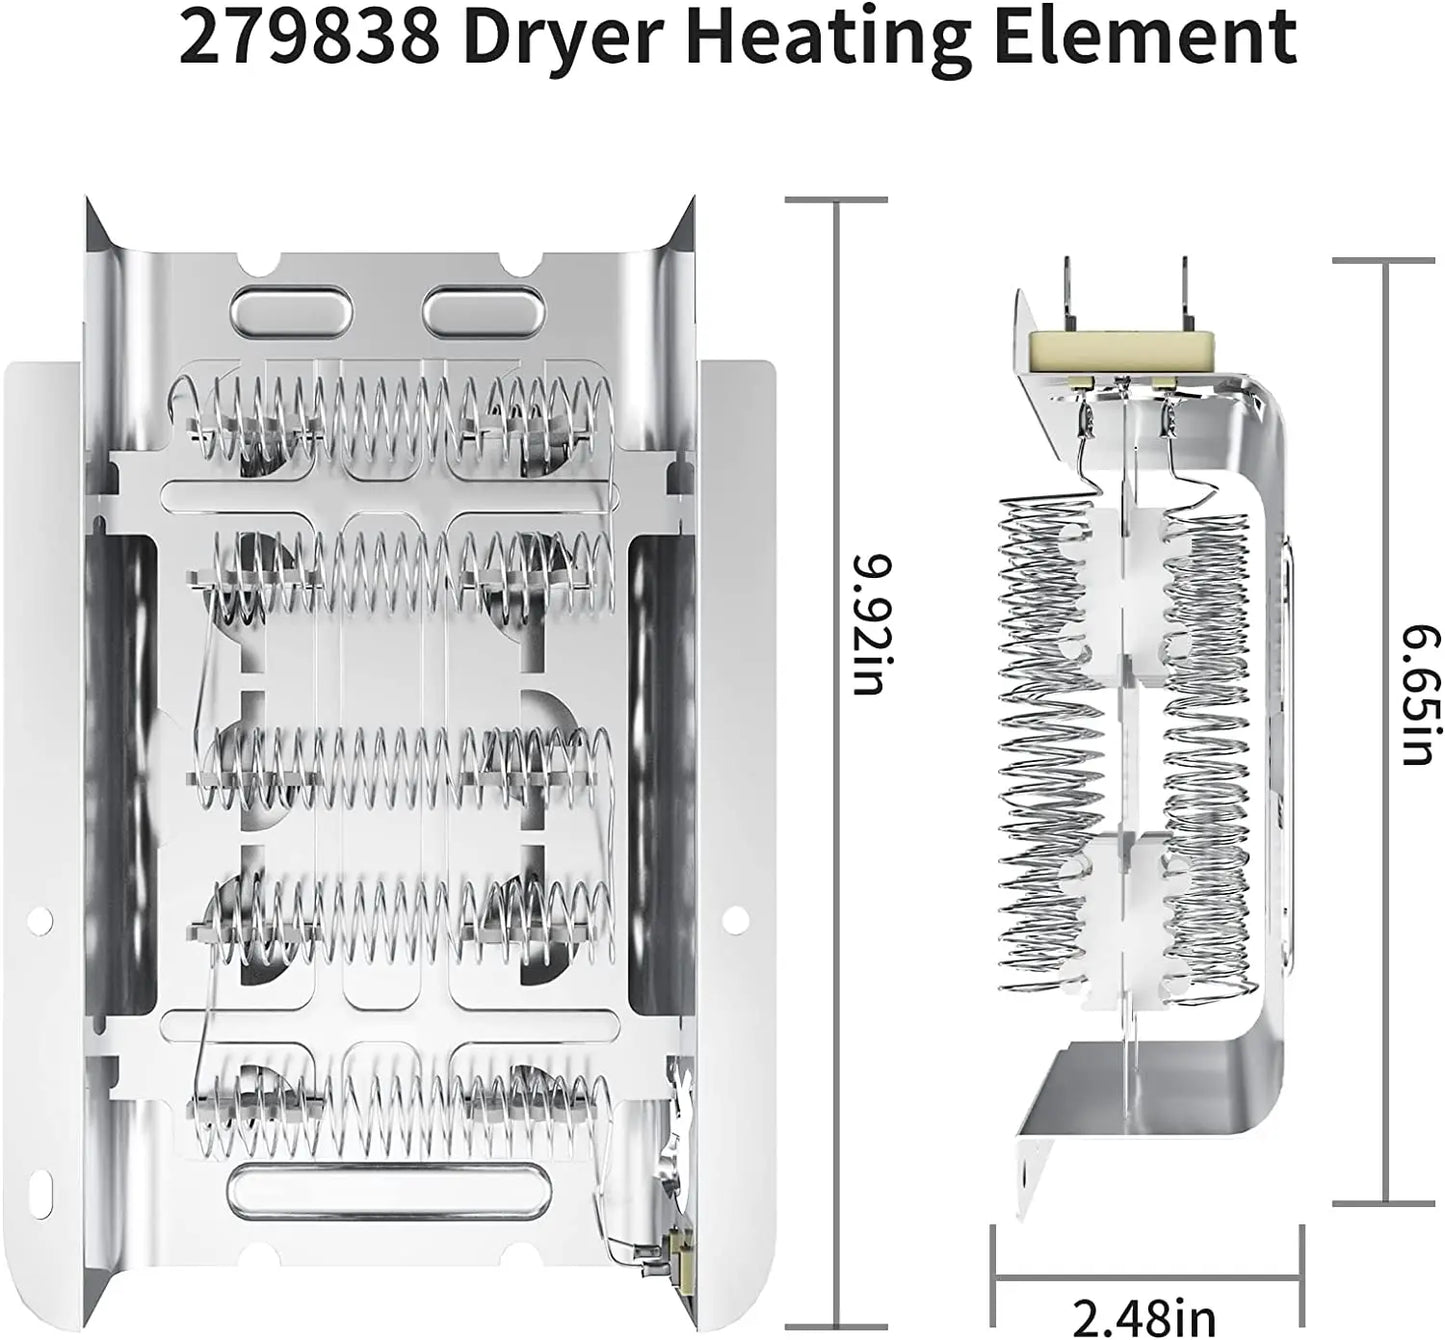 279838 Dryer Heating Element compatible with Whirlpool Kenmore Maytag Dryer Heating Element Parts Replace AP3094254 8565582